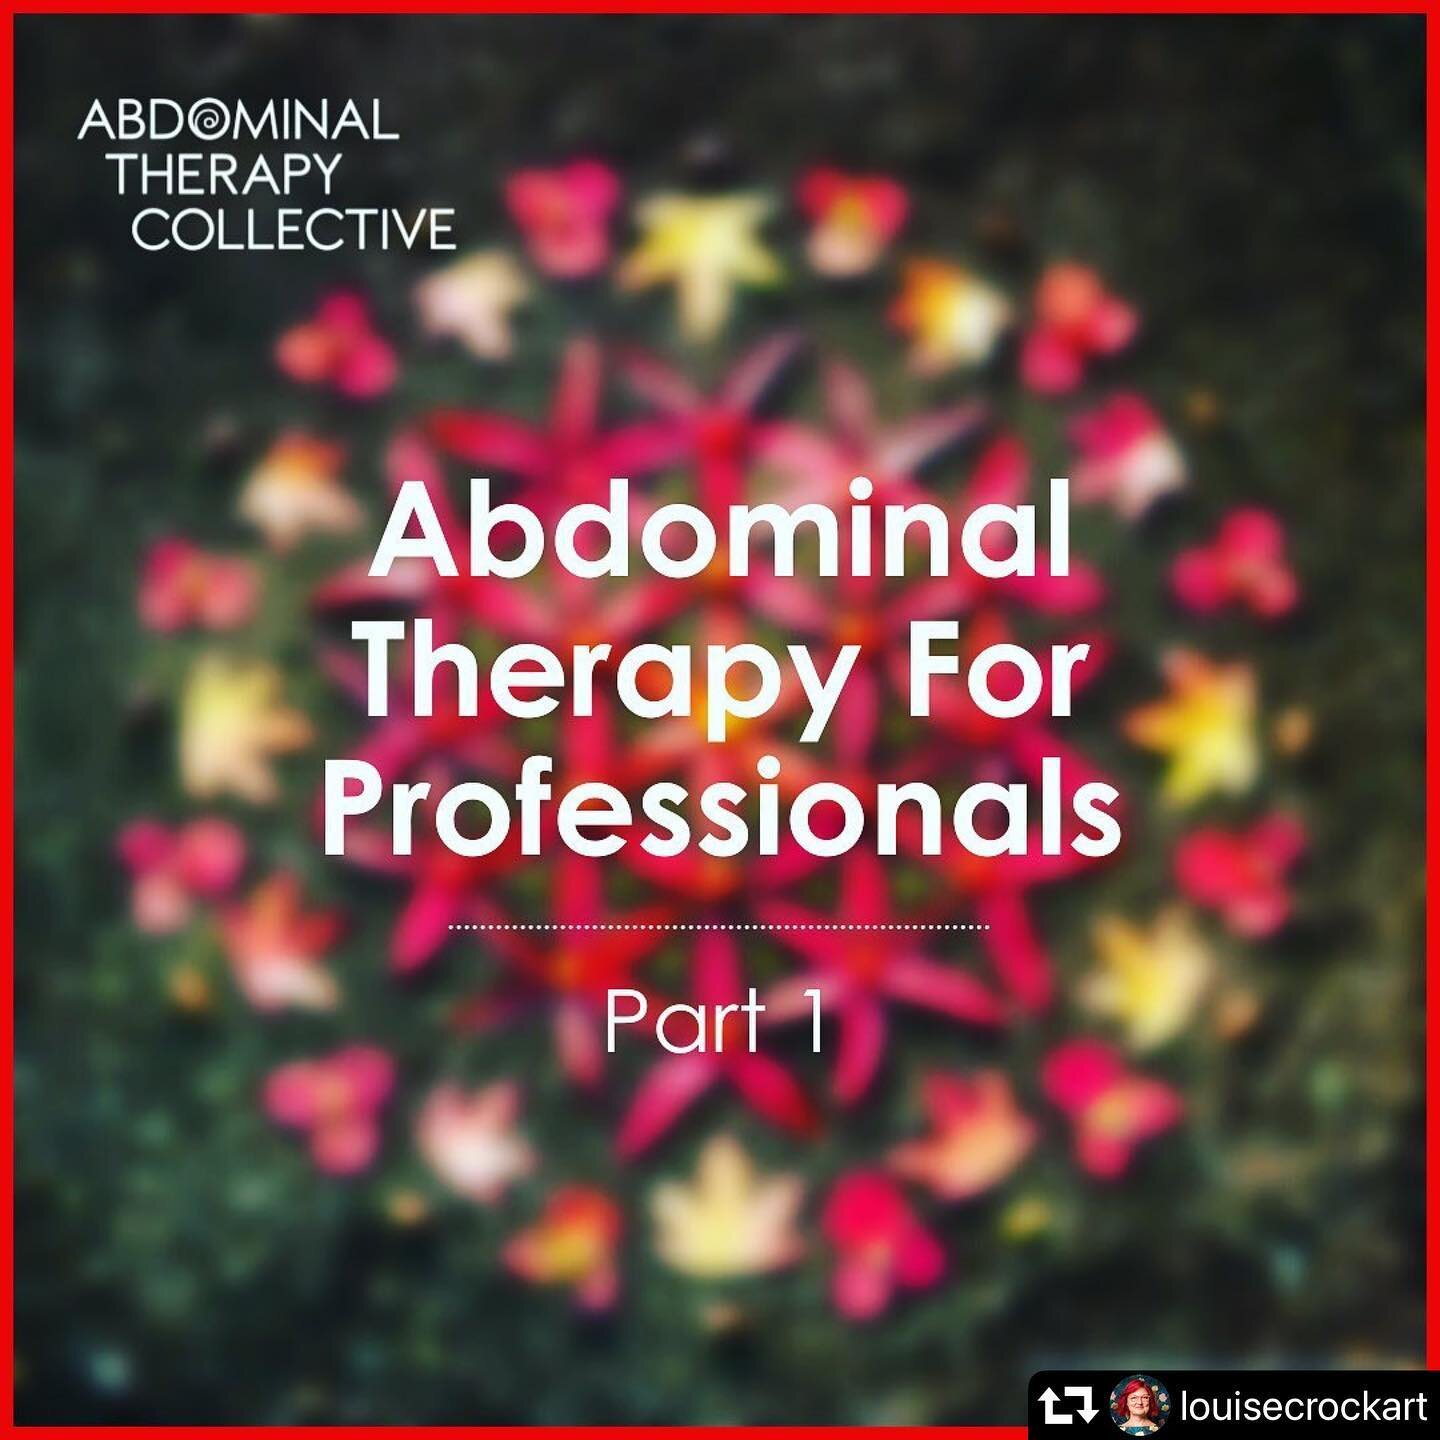 Our class schedule is filling fast!

Pop over to our website for up-to-the-minute information on a class being offered near you. 

Personal or professional interests are all catered for. 

For professional training, Abdominal Therapy For Professional